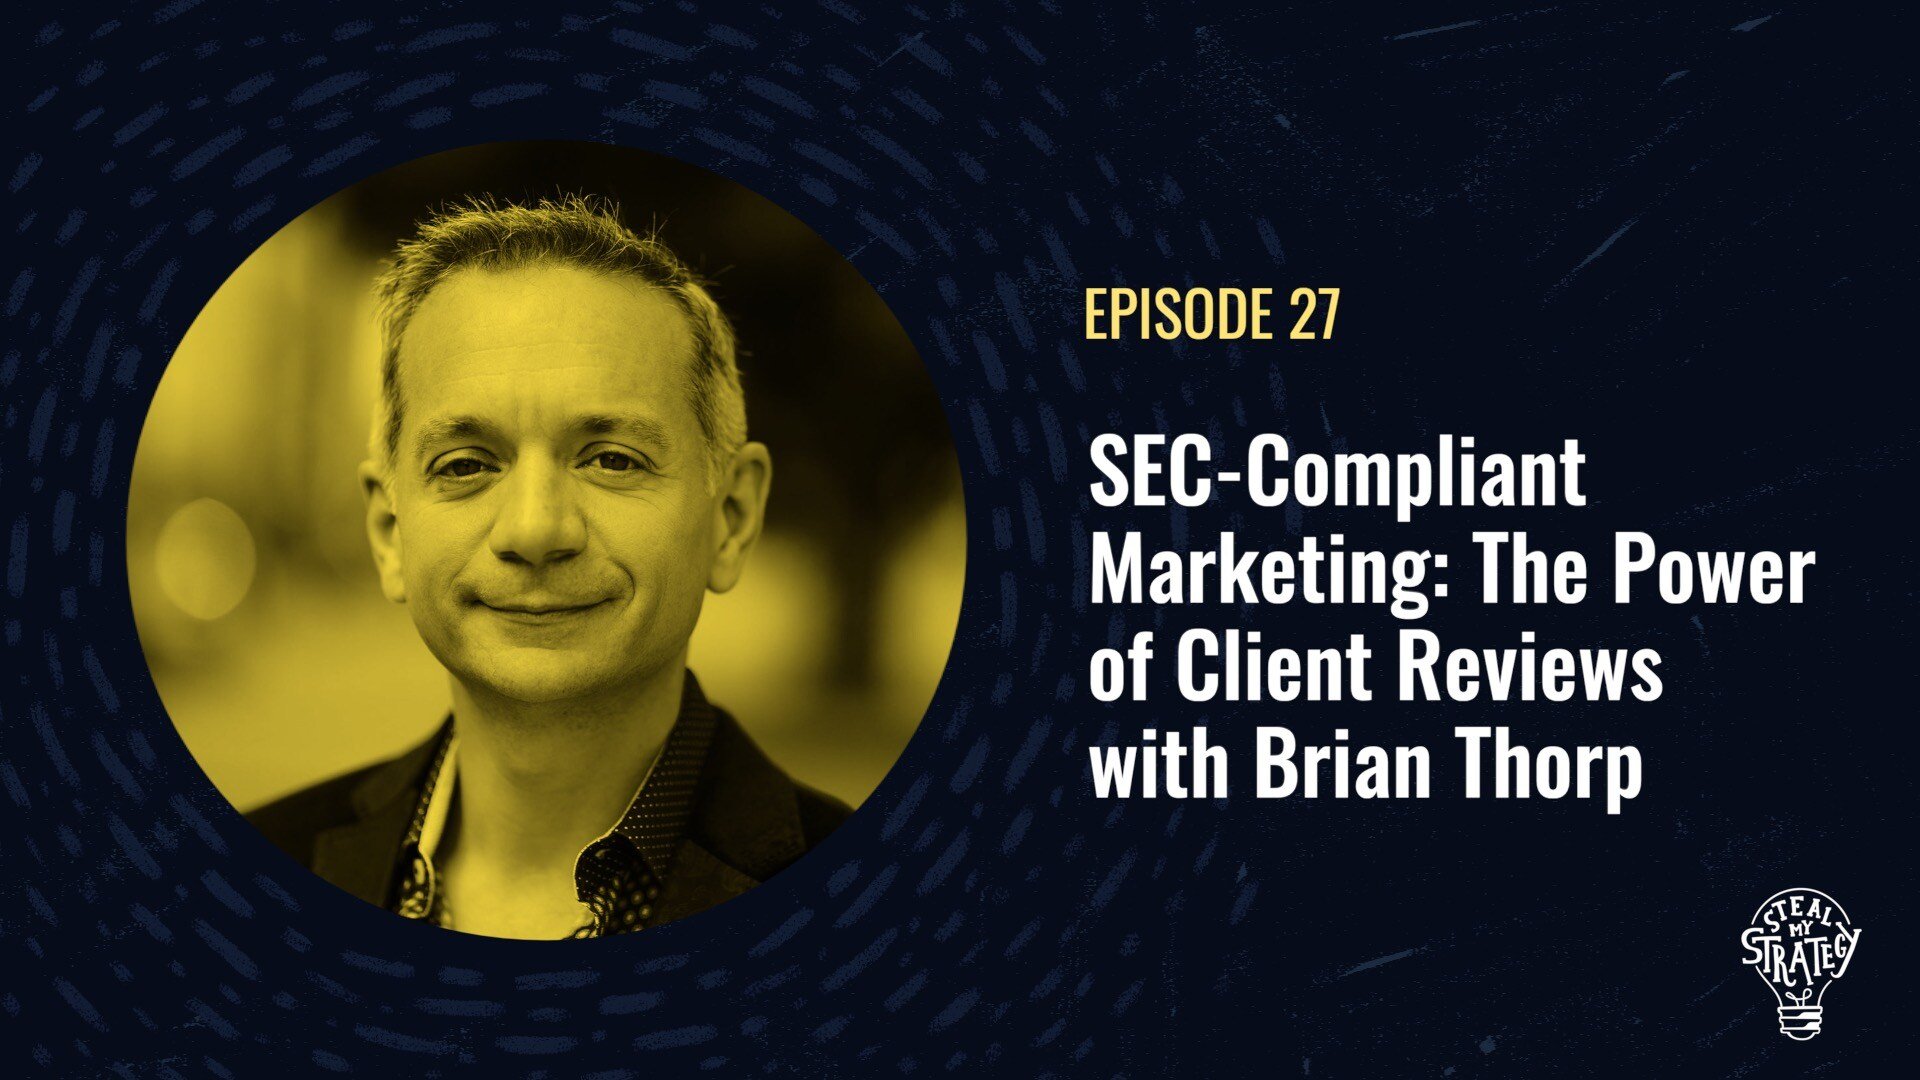 [Podcast] Steal My Strategy: SEC-Compliant Marketing: The Power of Client Reviews with Brian Thorp